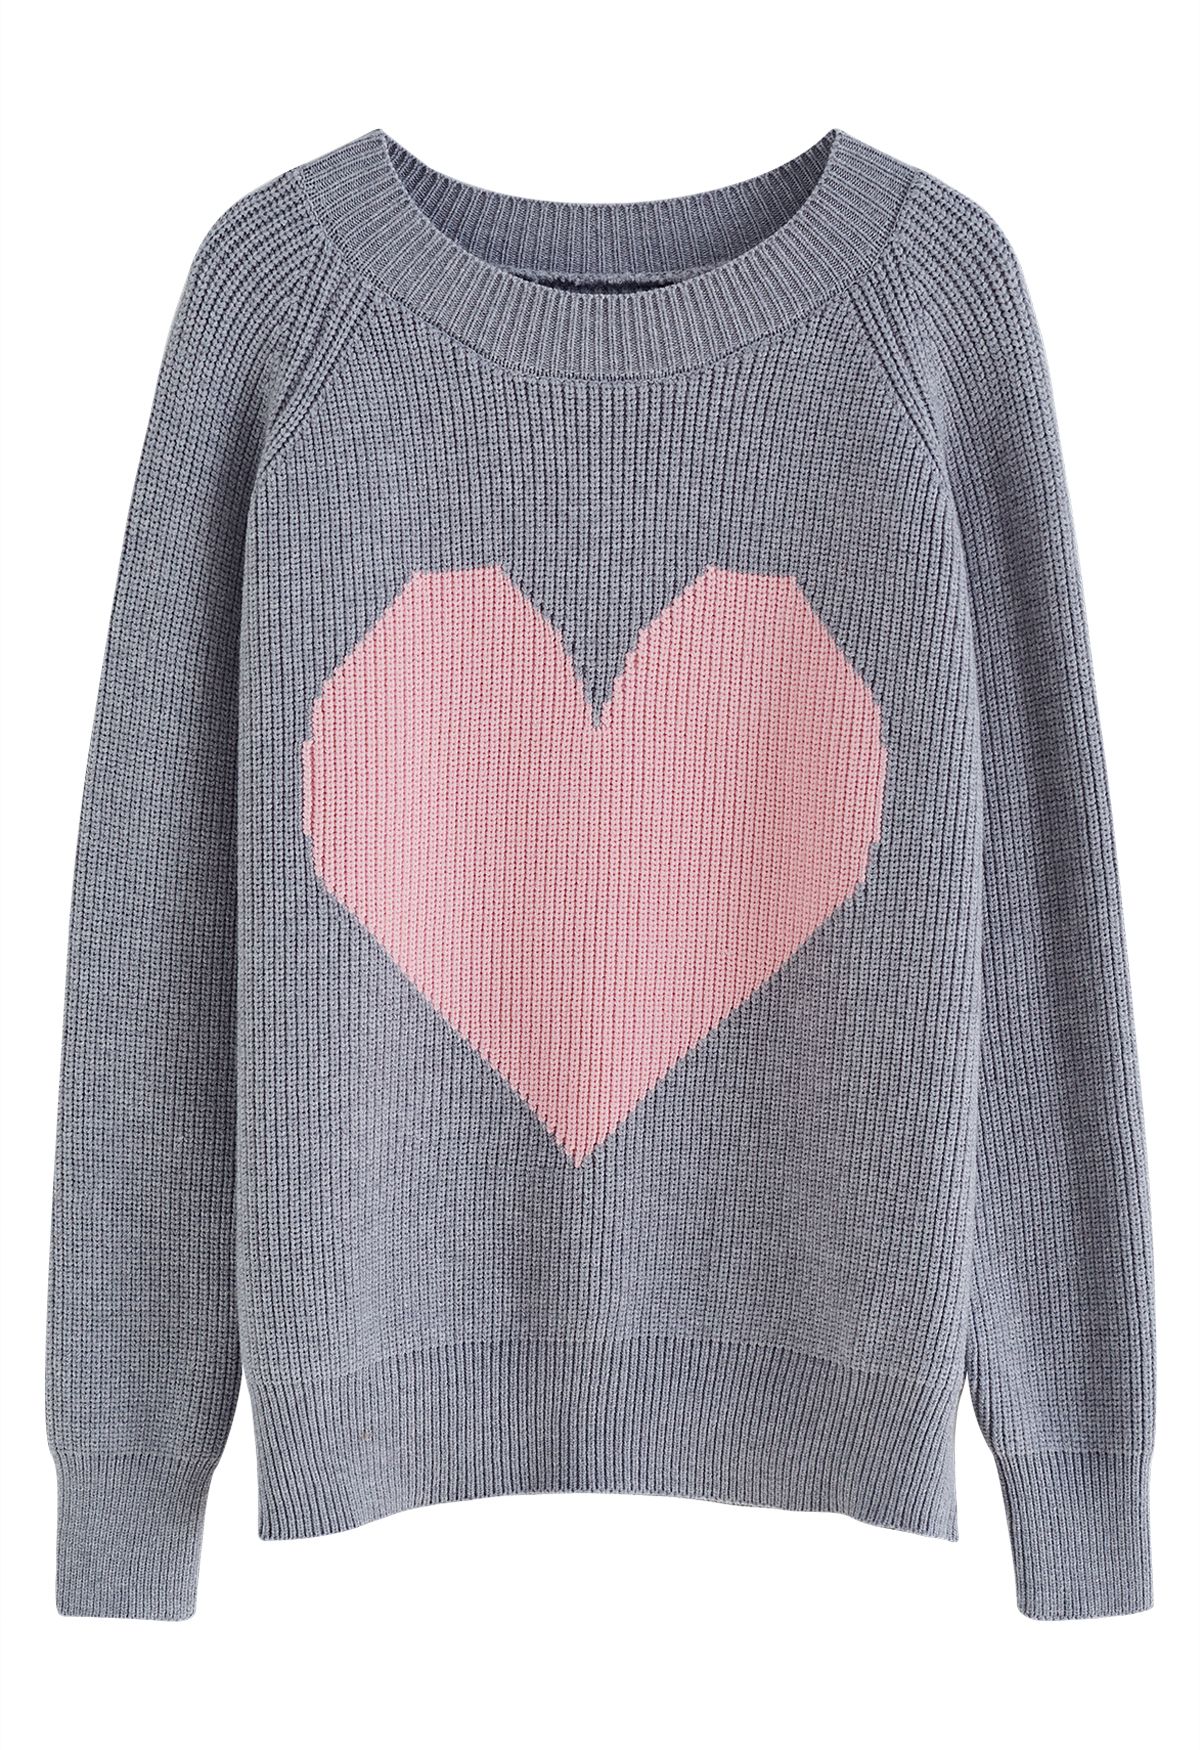 One Heart Rippstrick-Oversized-Pullover in Grau